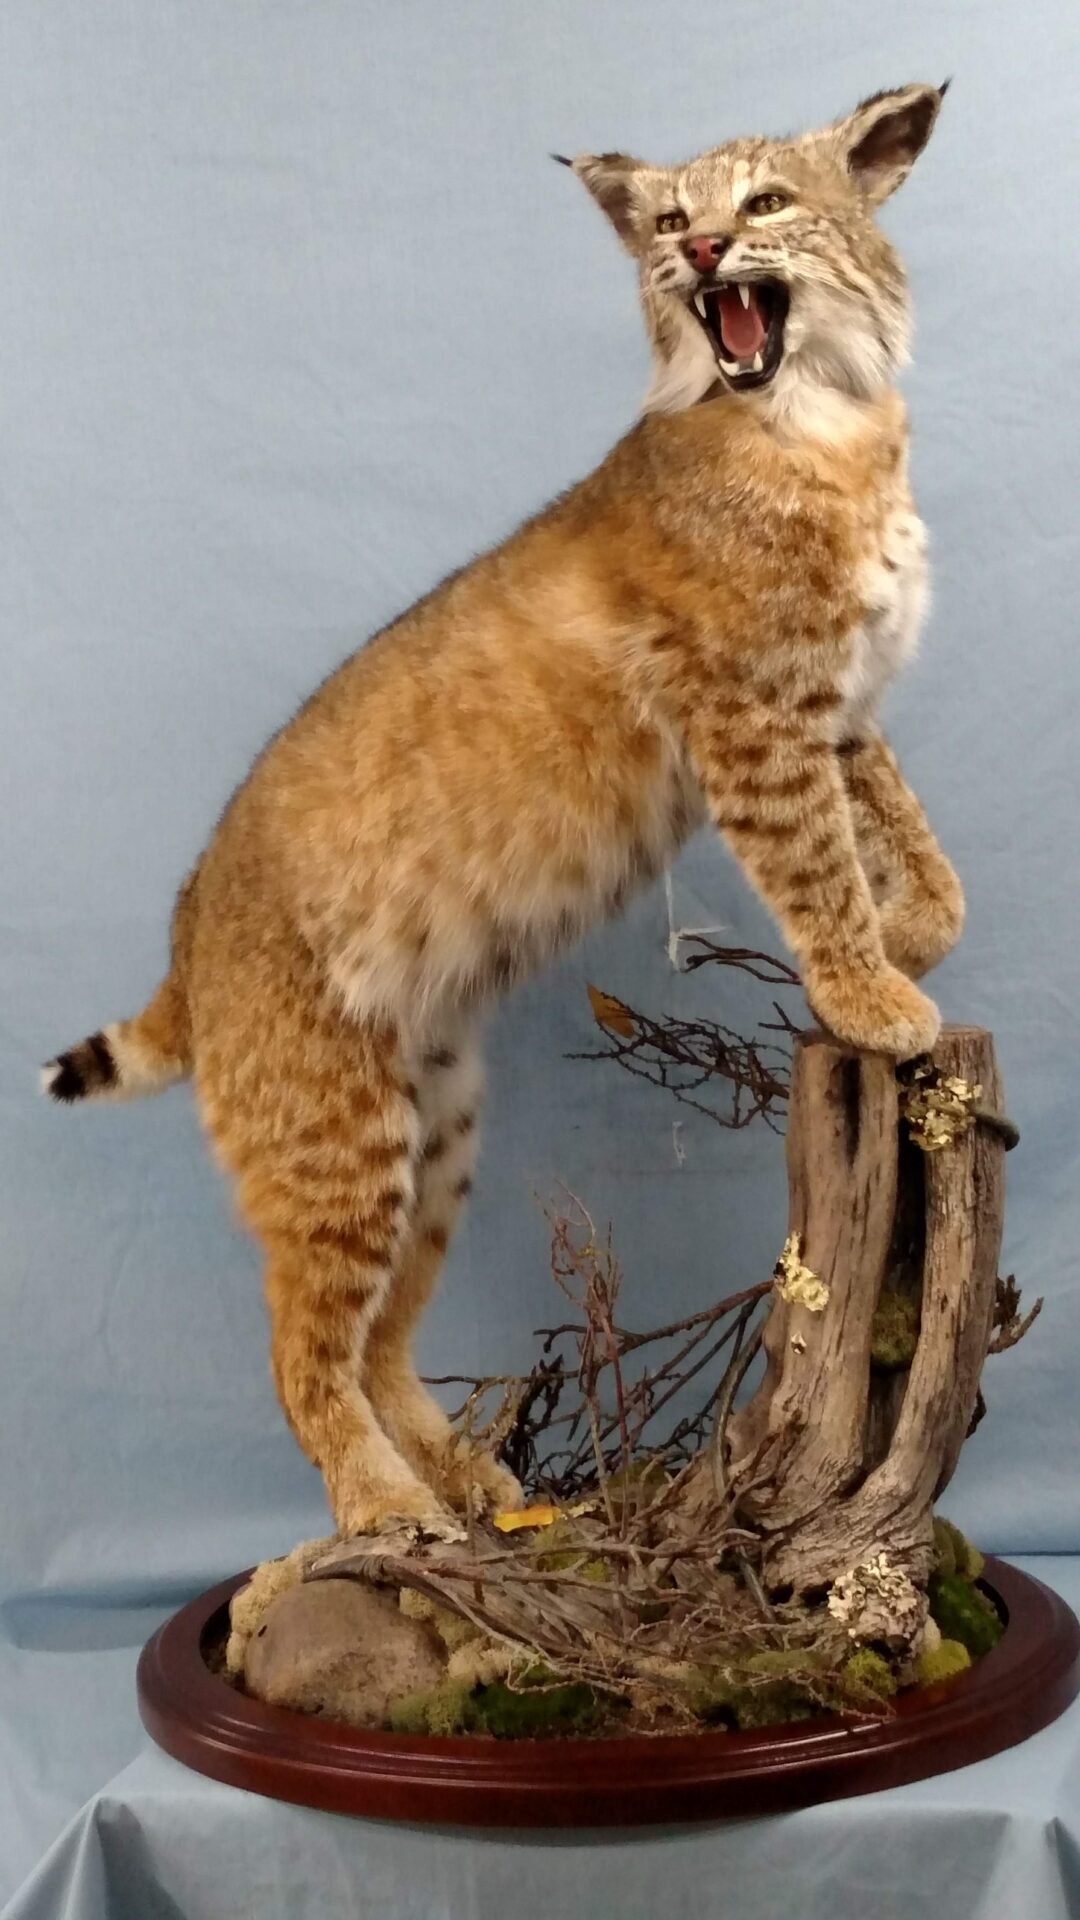 This Cat Taxidermy seems to be seeking all attention